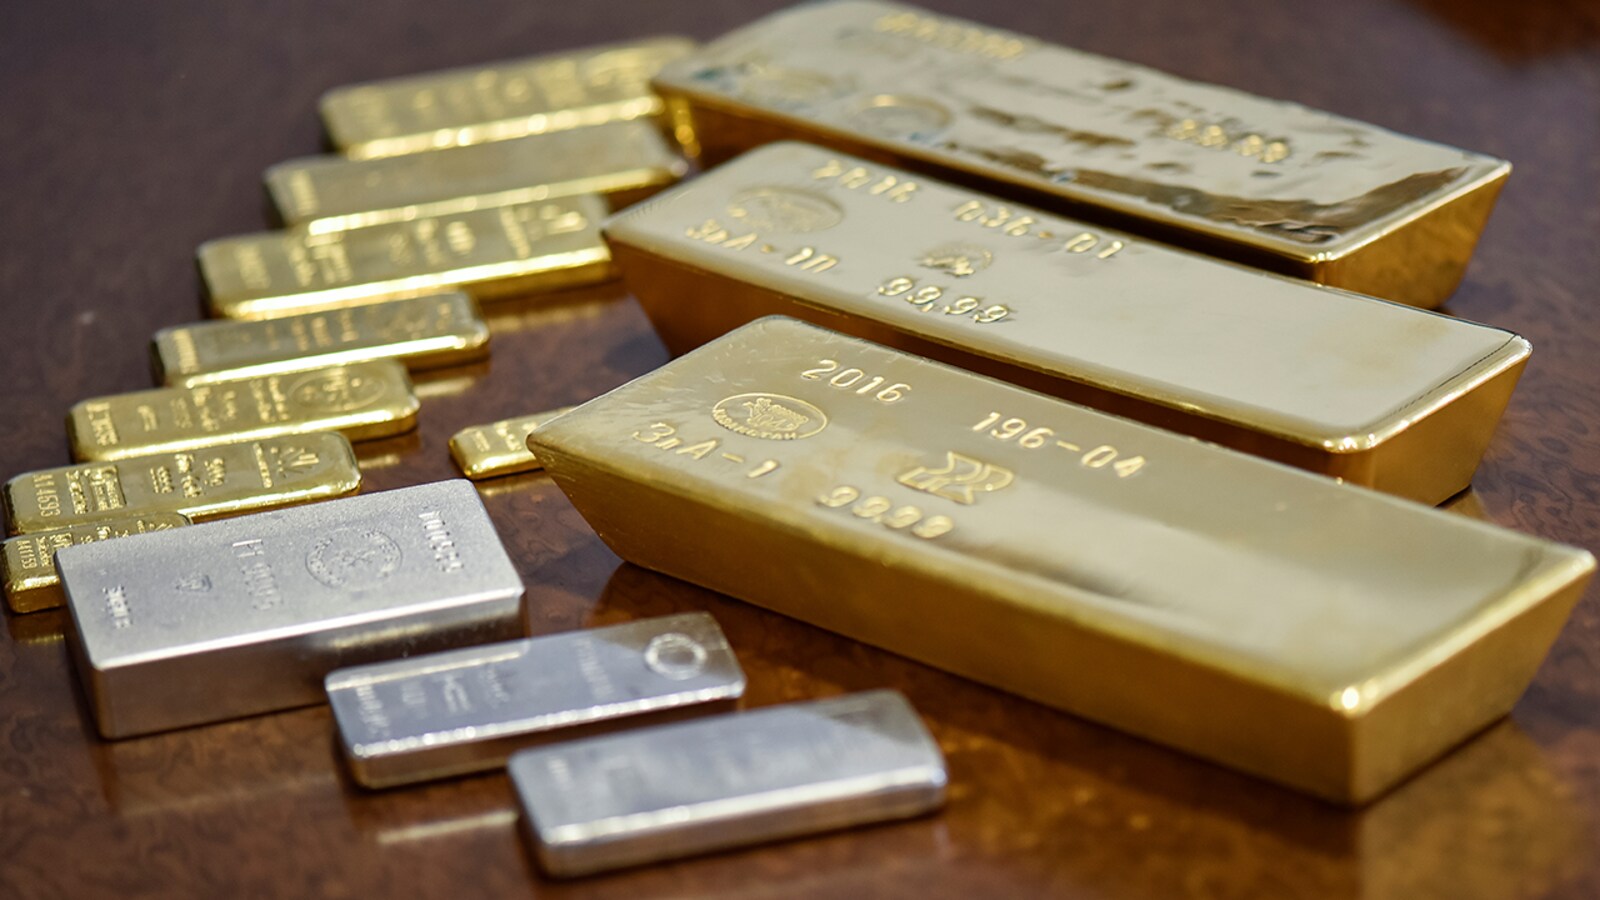 Gold and silver prices today: Yellow metal recovers after heavy sell-off;  price rises by 1.23% - BusinessToday